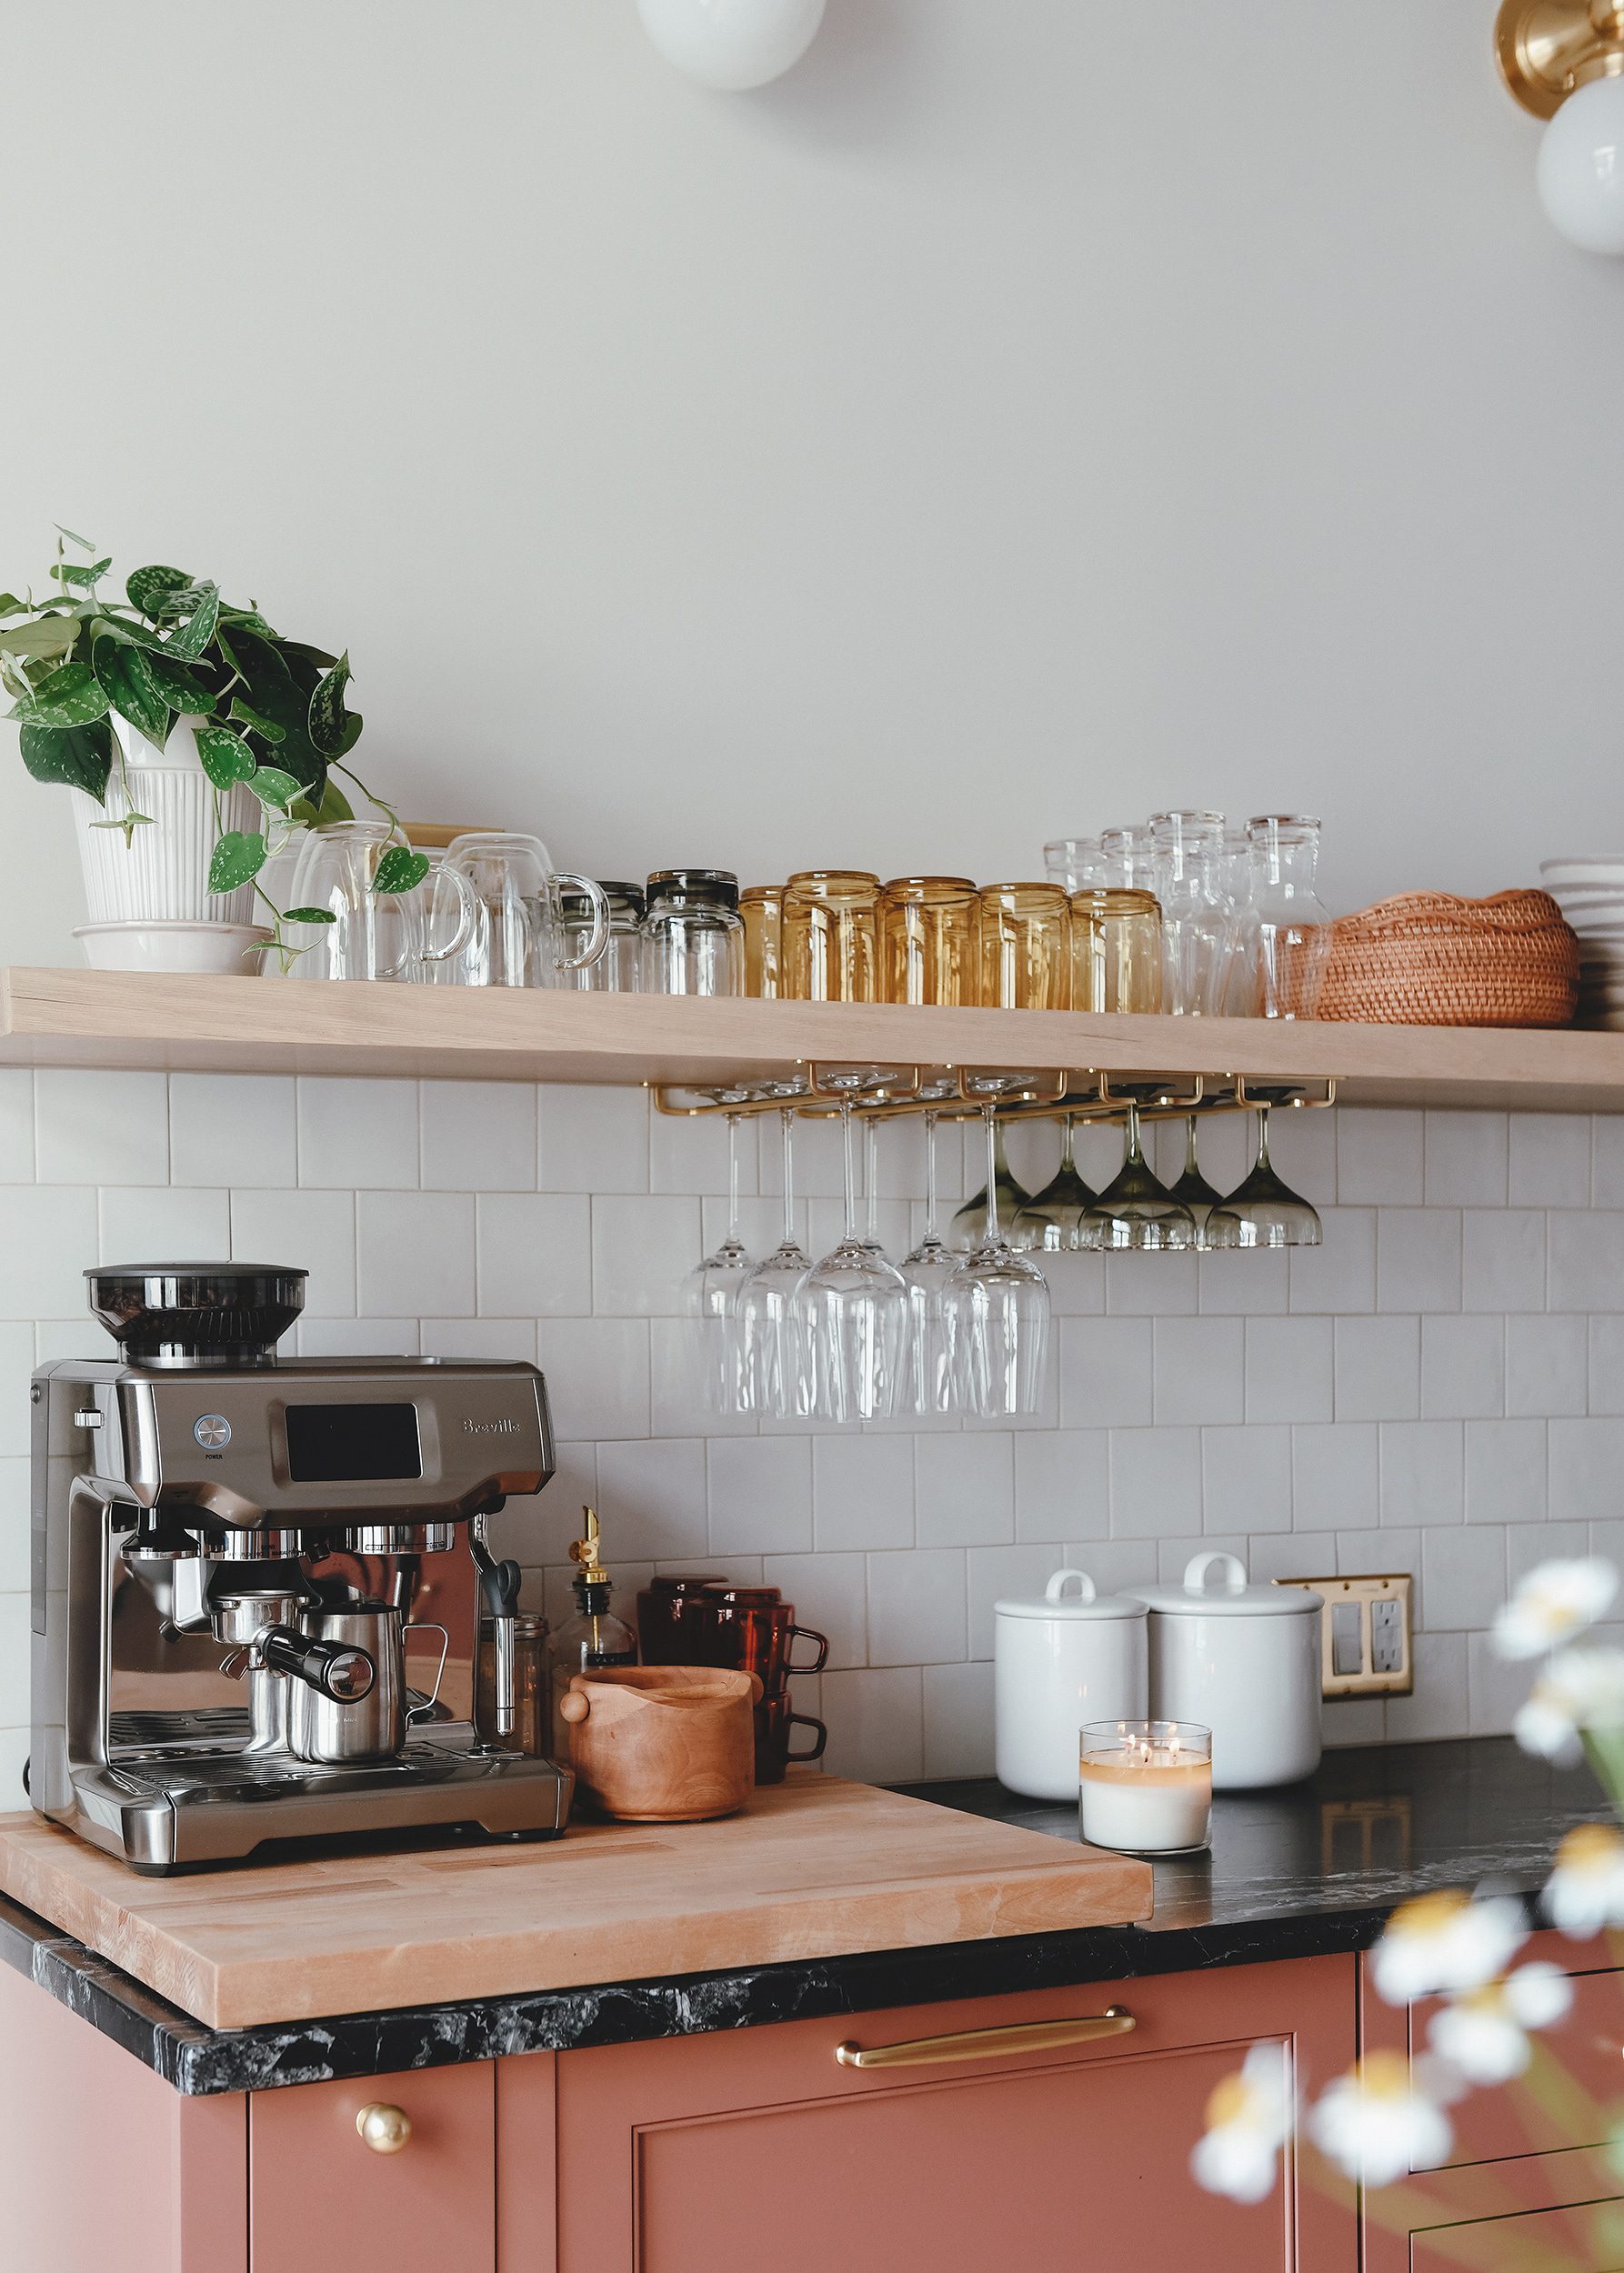 How We Created a Beverage Station In Our Kitchen - Yellow Brick Home